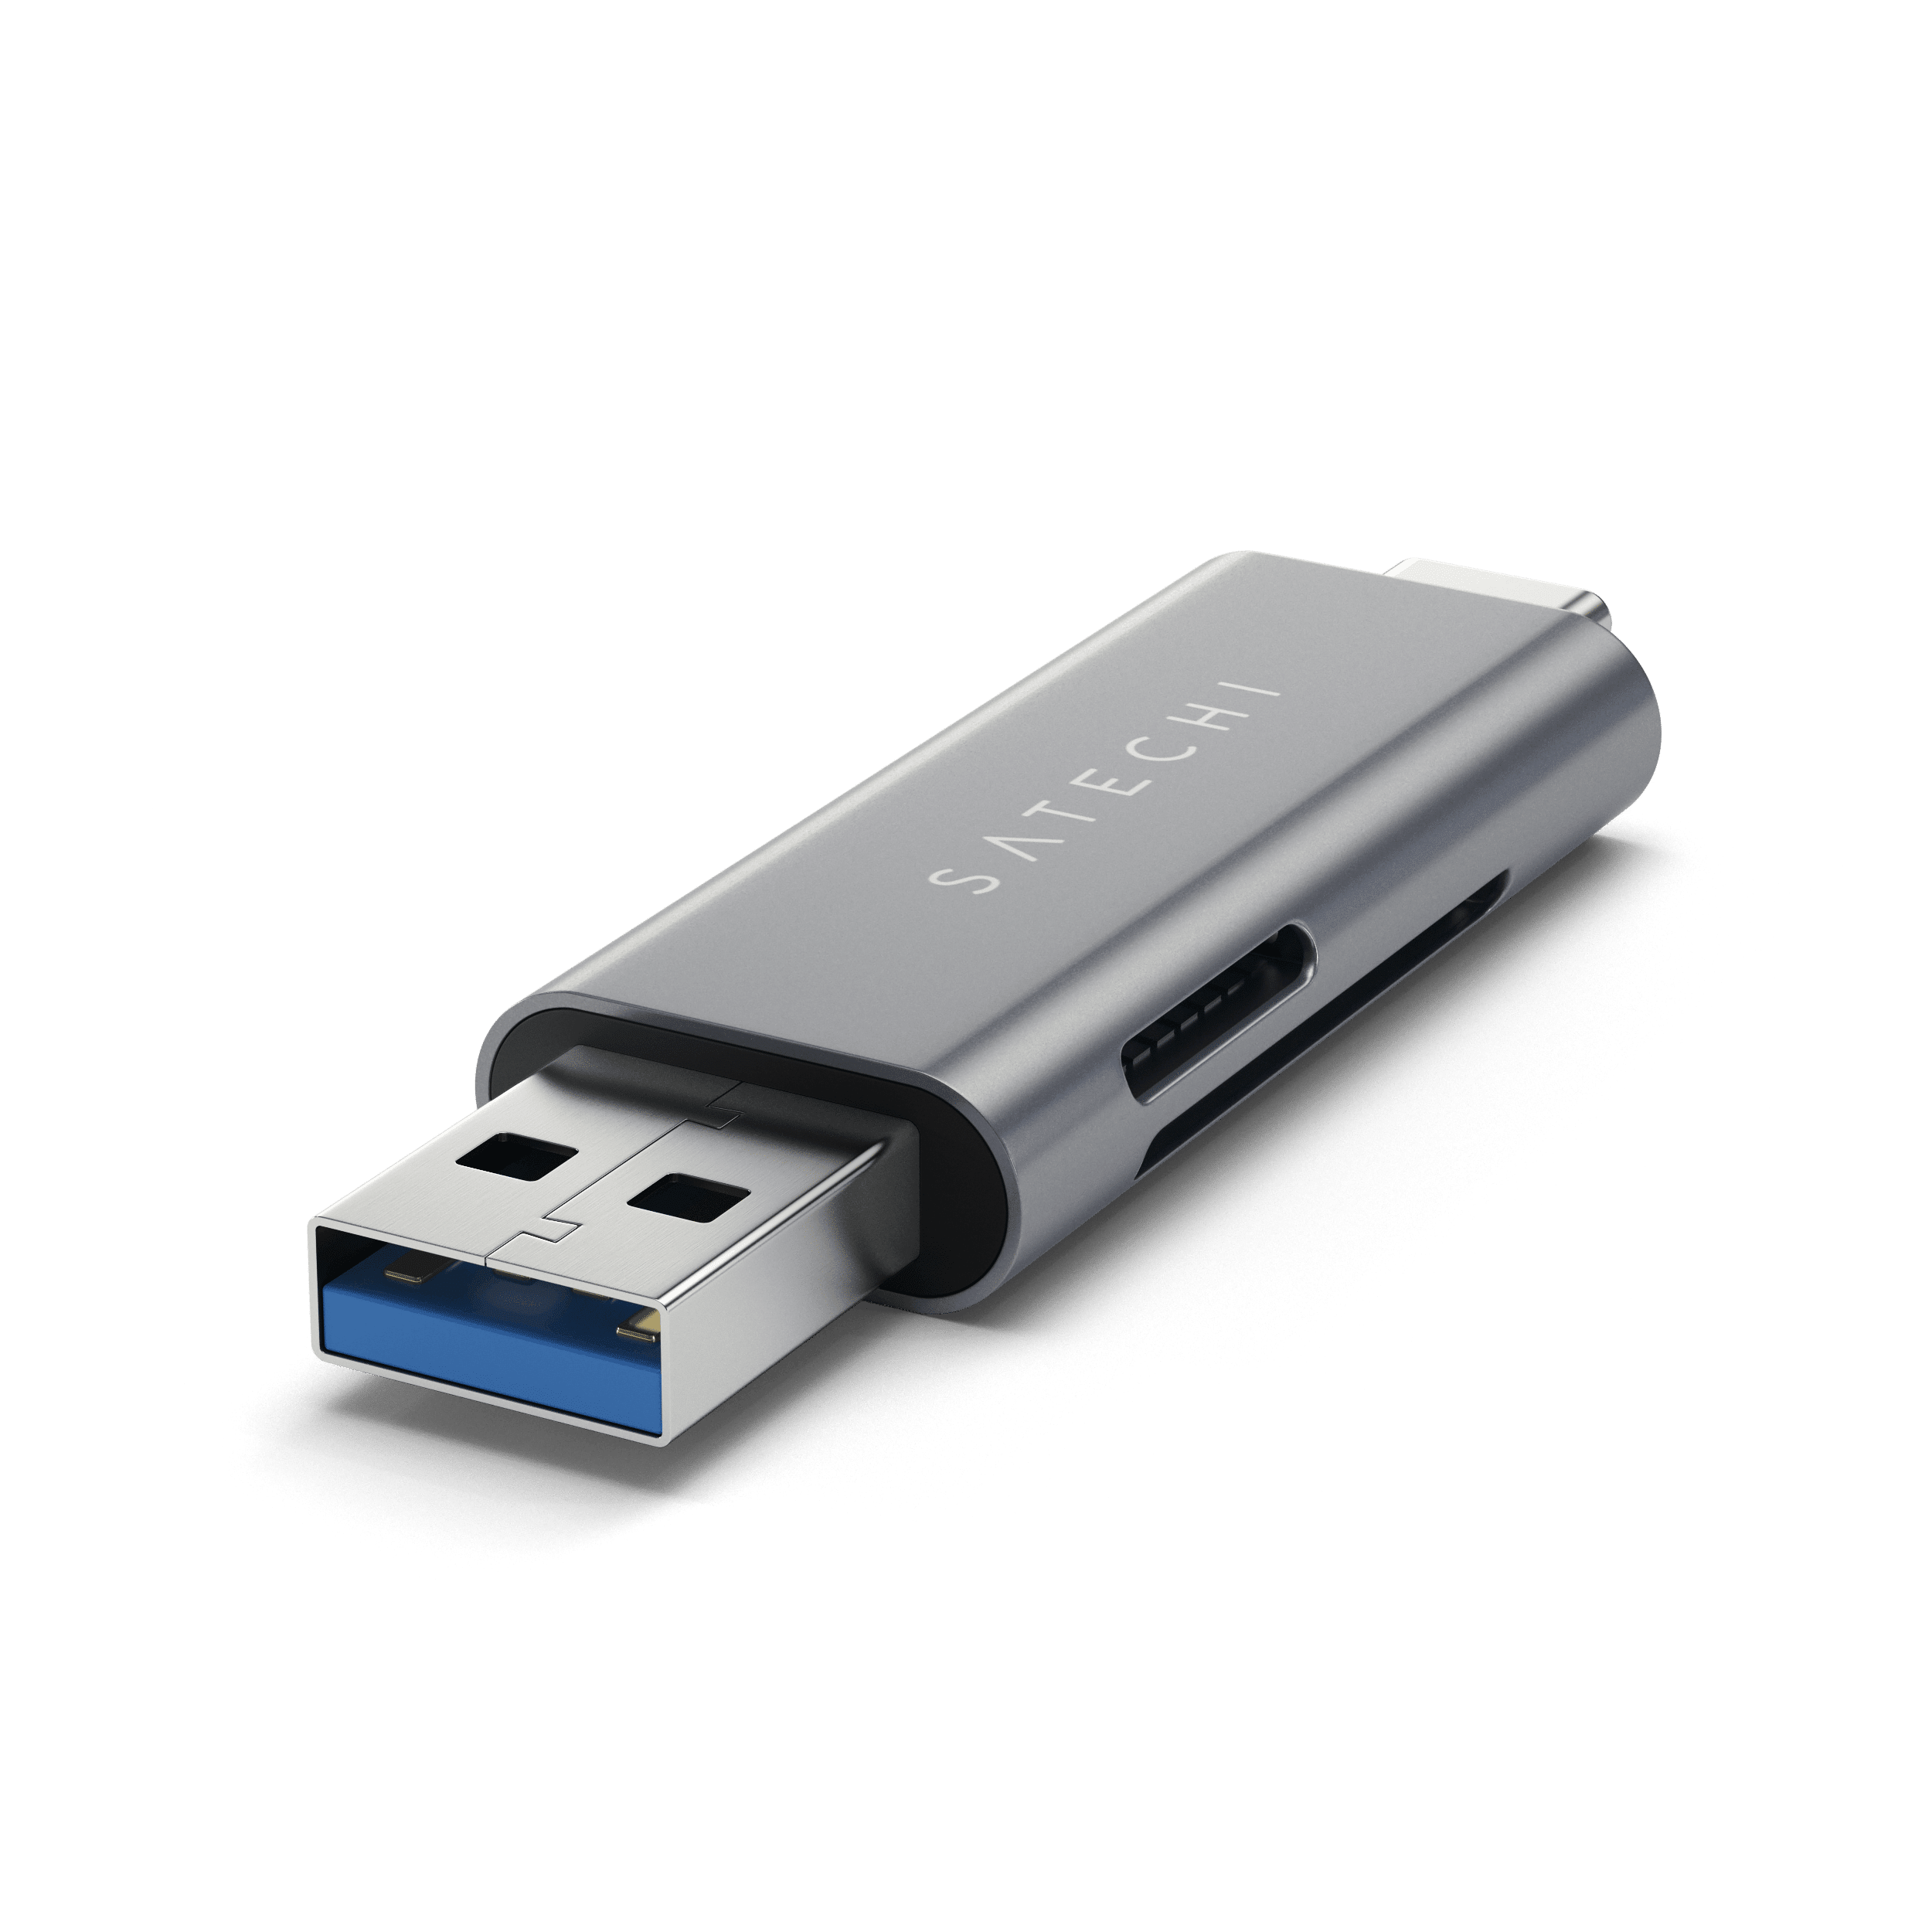 Aluminum Type-C USB 3.0 and Micro/SD Card Reader